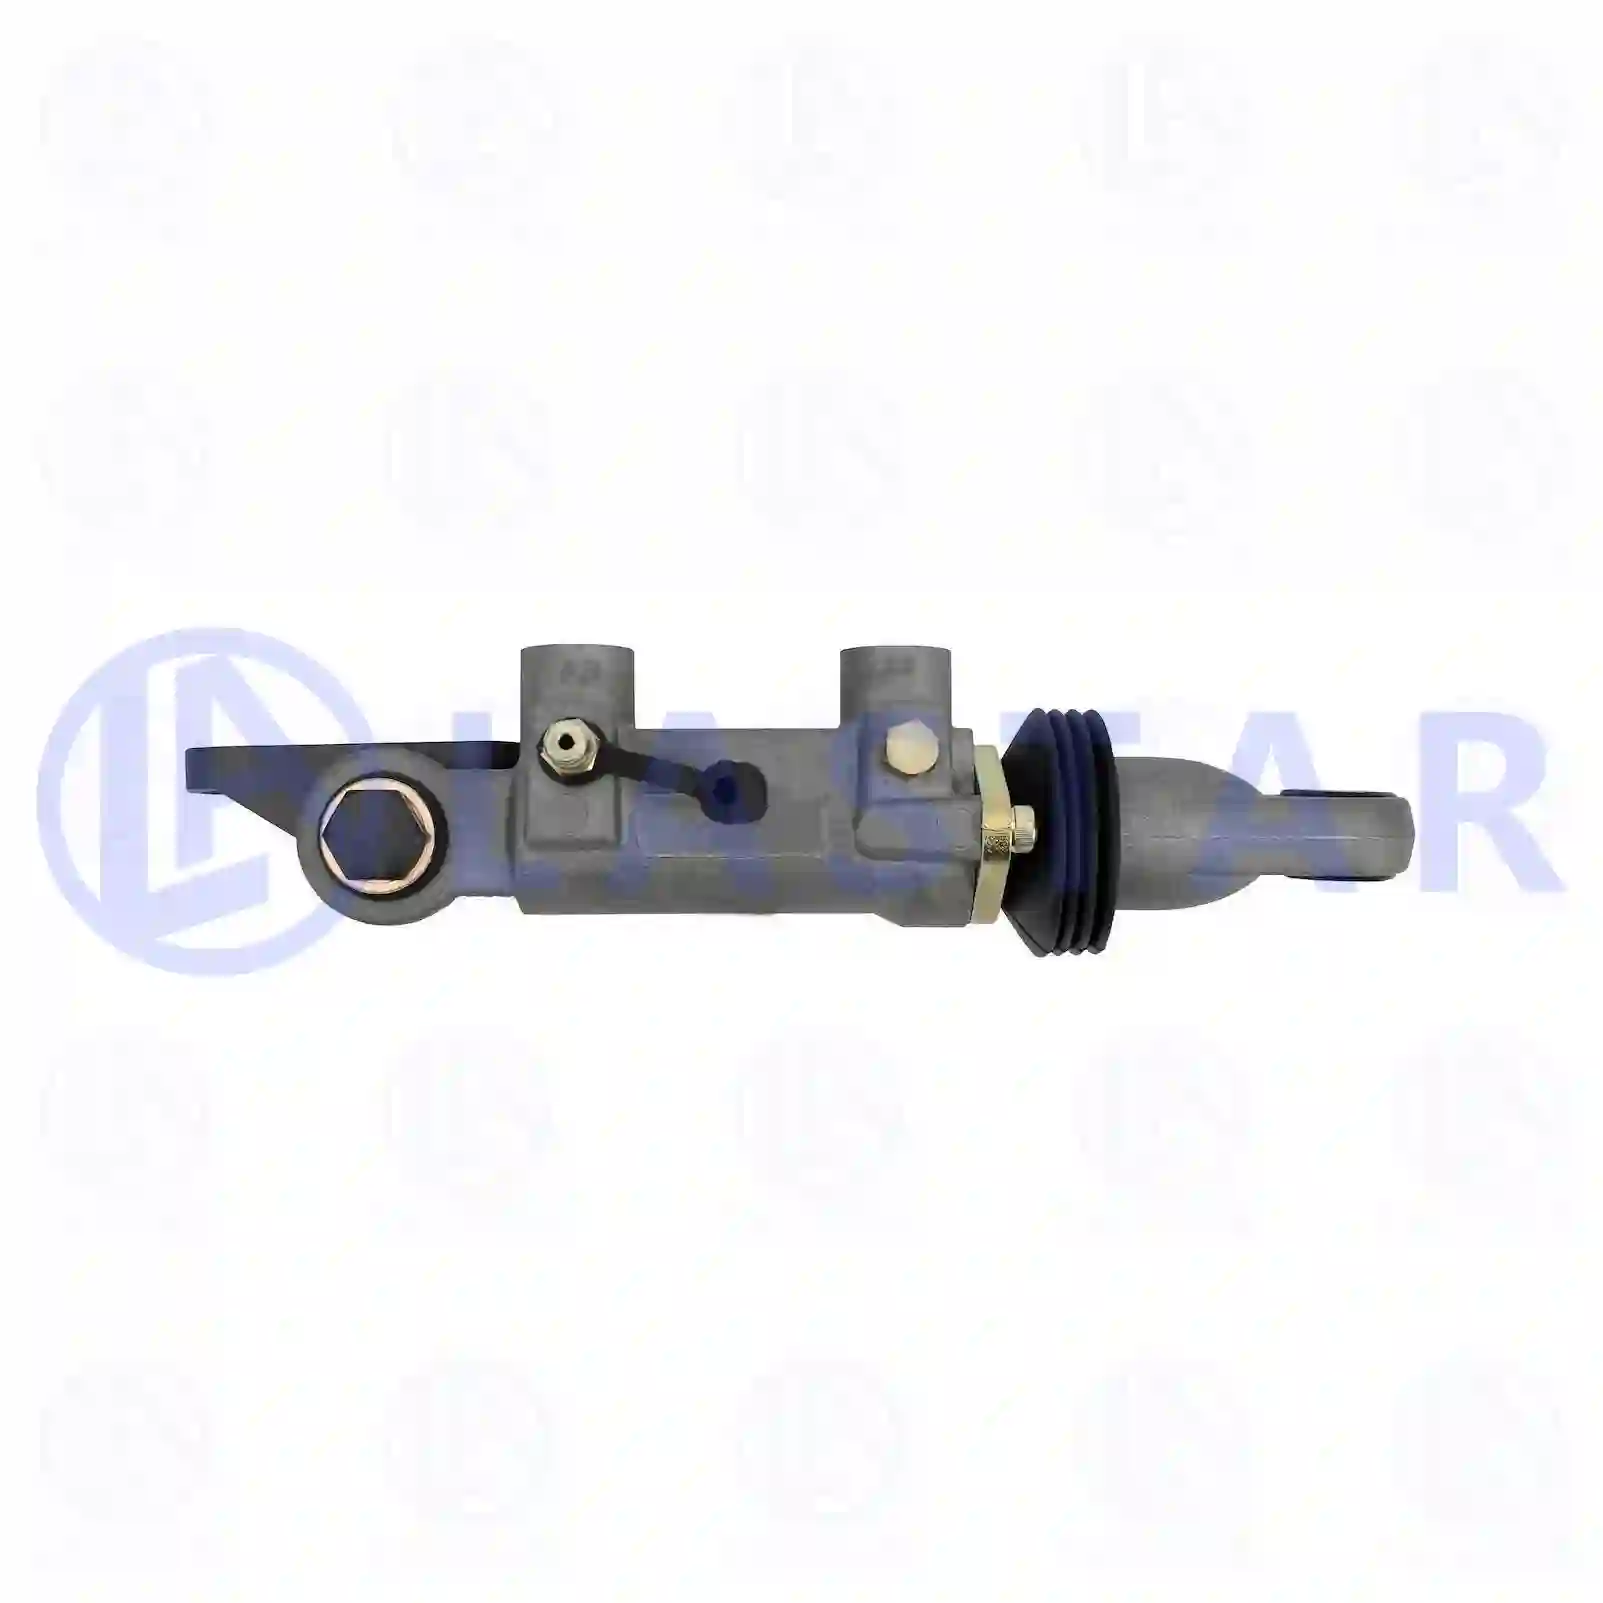 Shifting cylinder, with bracket, 77732599, 0012603463, ZG30603-0008 ||  77732599 Lastar Spare Part | Truck Spare Parts, Auotomotive Spare Parts Shifting cylinder, with bracket, 77732599, 0012603463, ZG30603-0008 ||  77732599 Lastar Spare Part | Truck Spare Parts, Auotomotive Spare Parts